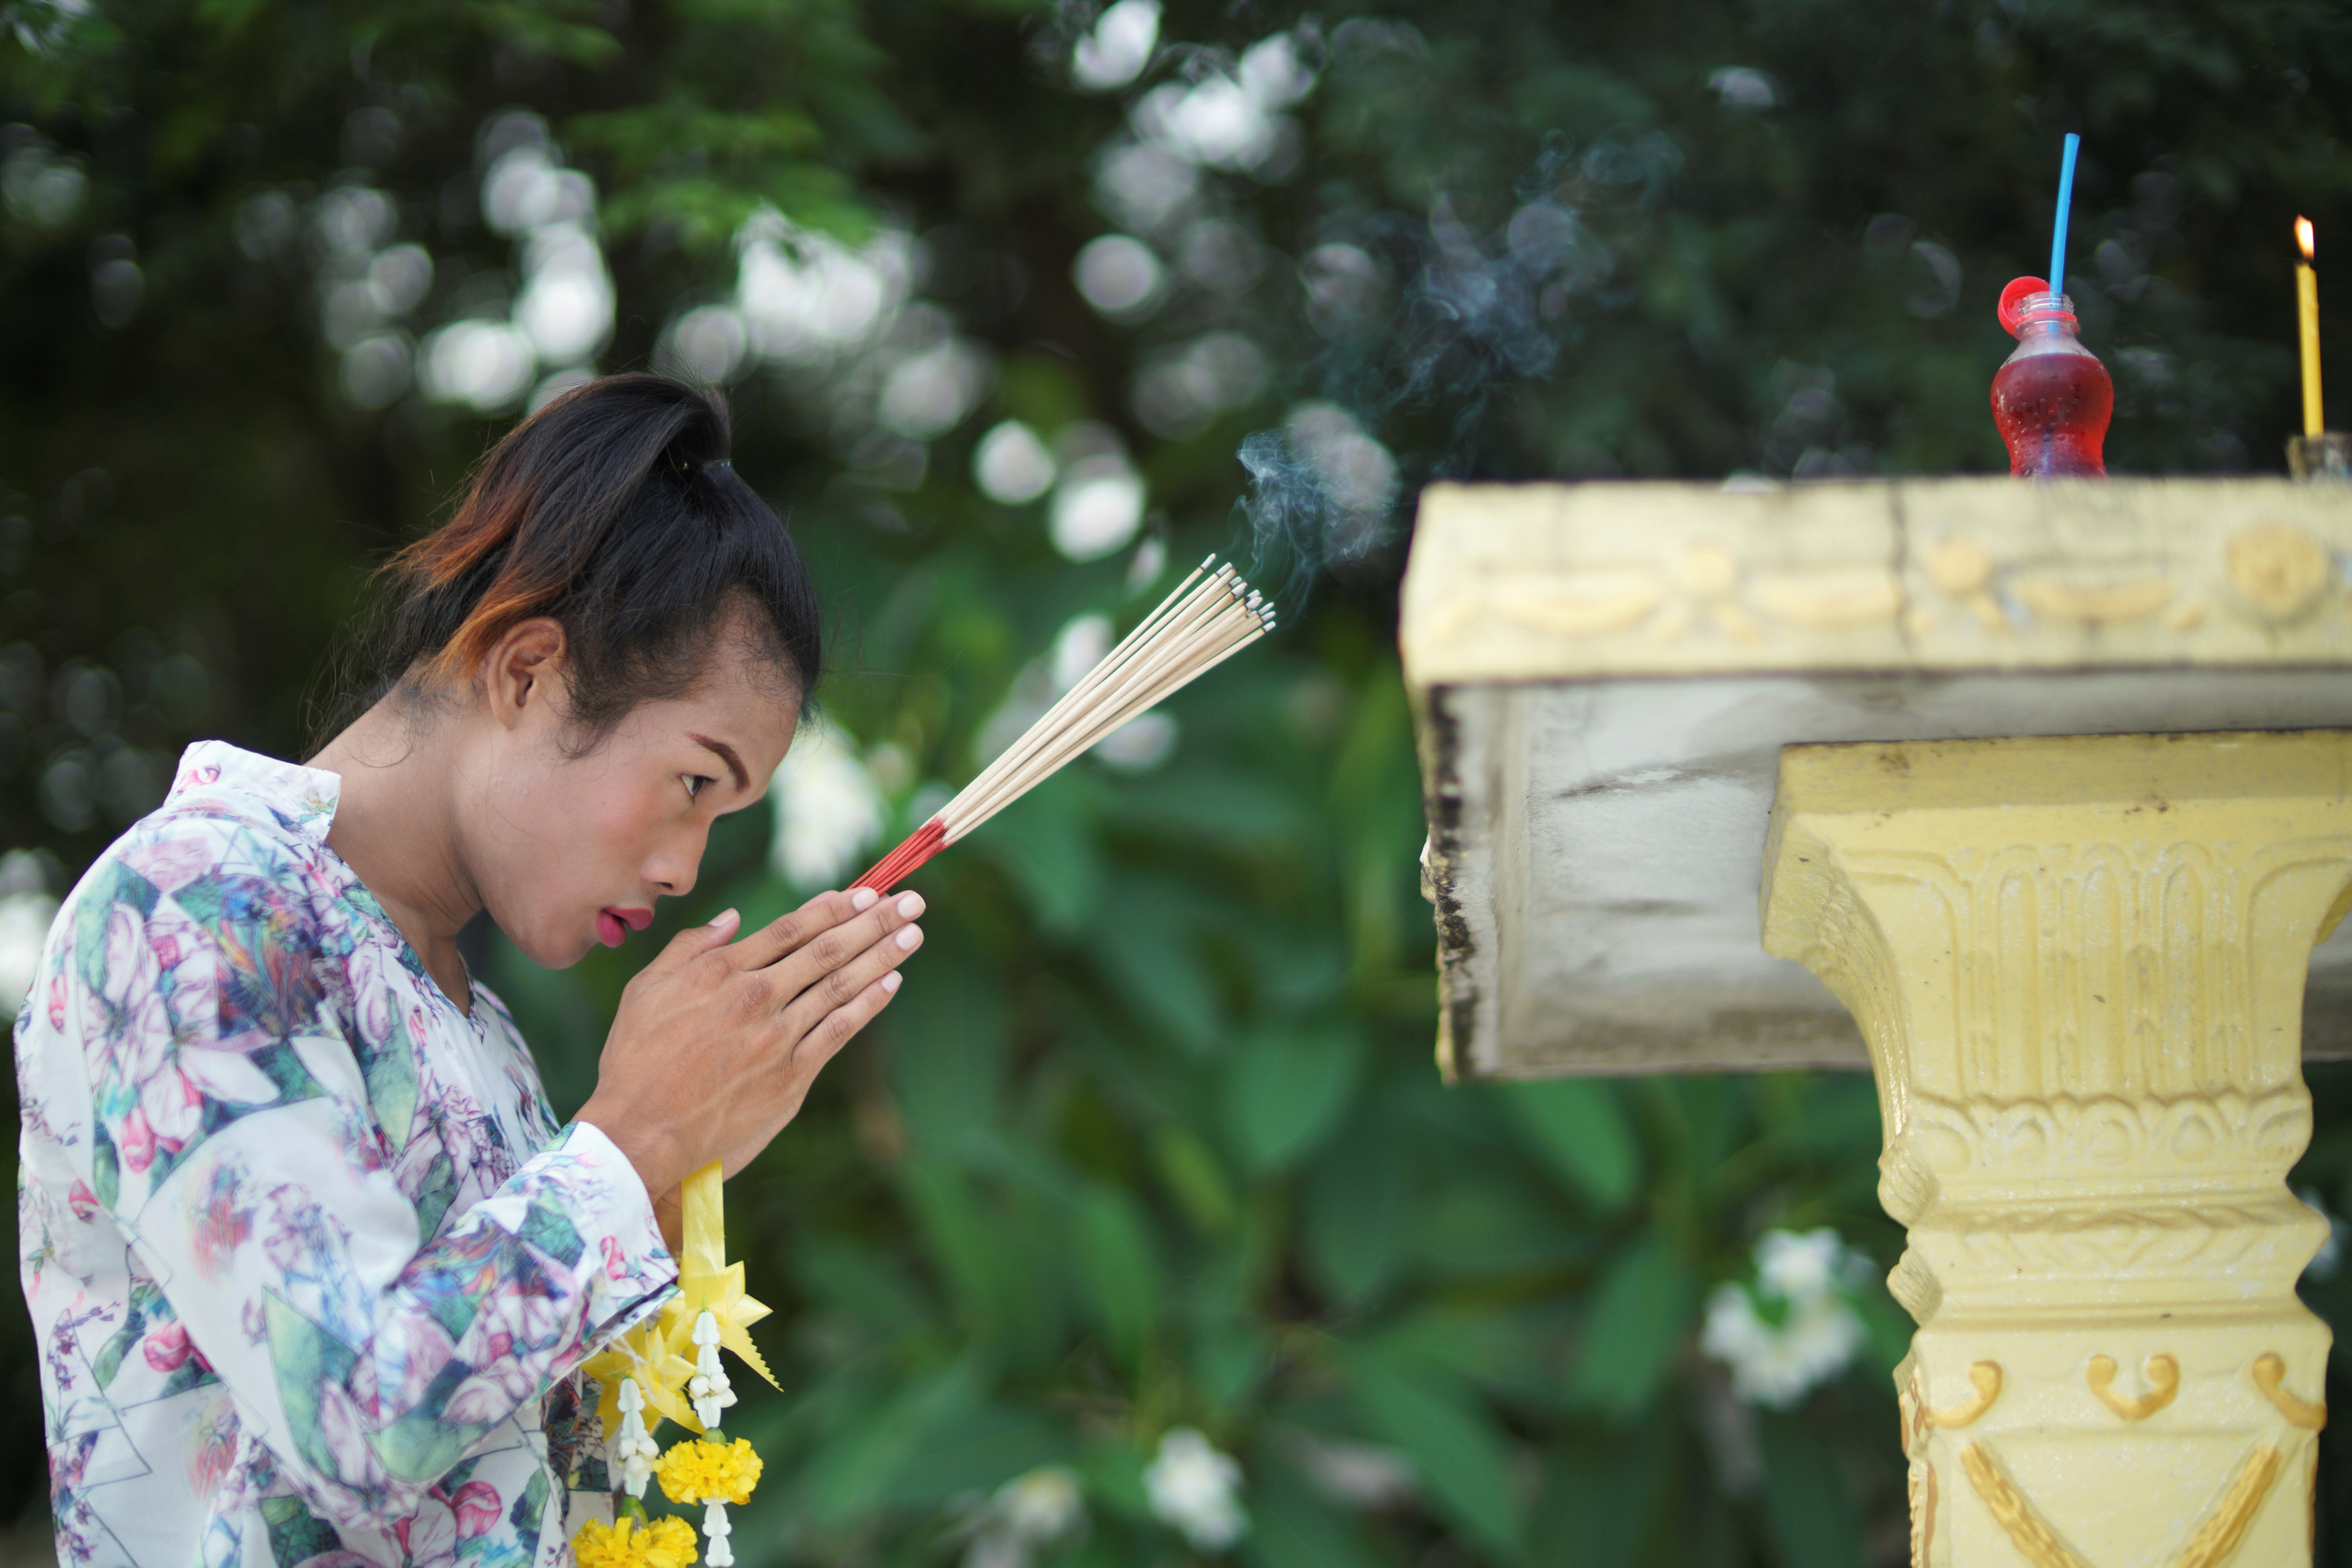 Muay Thai boxer Nong Rose Baan Charoensuk, 21, who is transgender, prays at a shrine near the Baan Charoensuk gym in Chachoengsao province, Thailand, July 12, 2017. REUTERS/Athit Perawongmetha